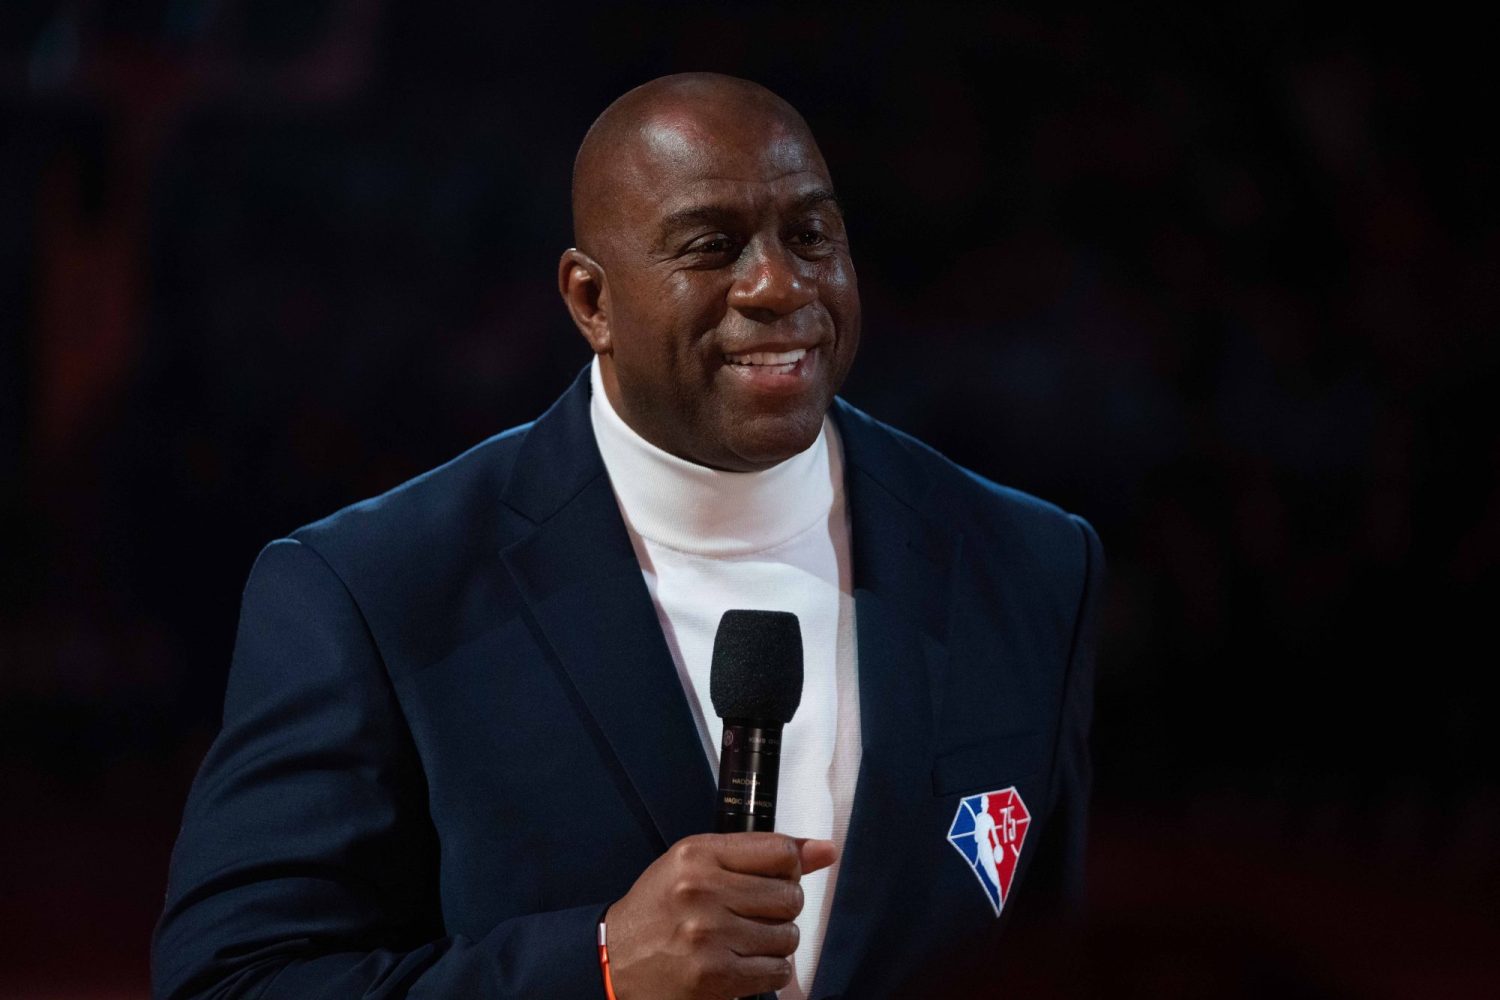 NBA great Magic Johnson before the 2022 NBA All-Star Game at Rocket Mortgage FieldHouse.